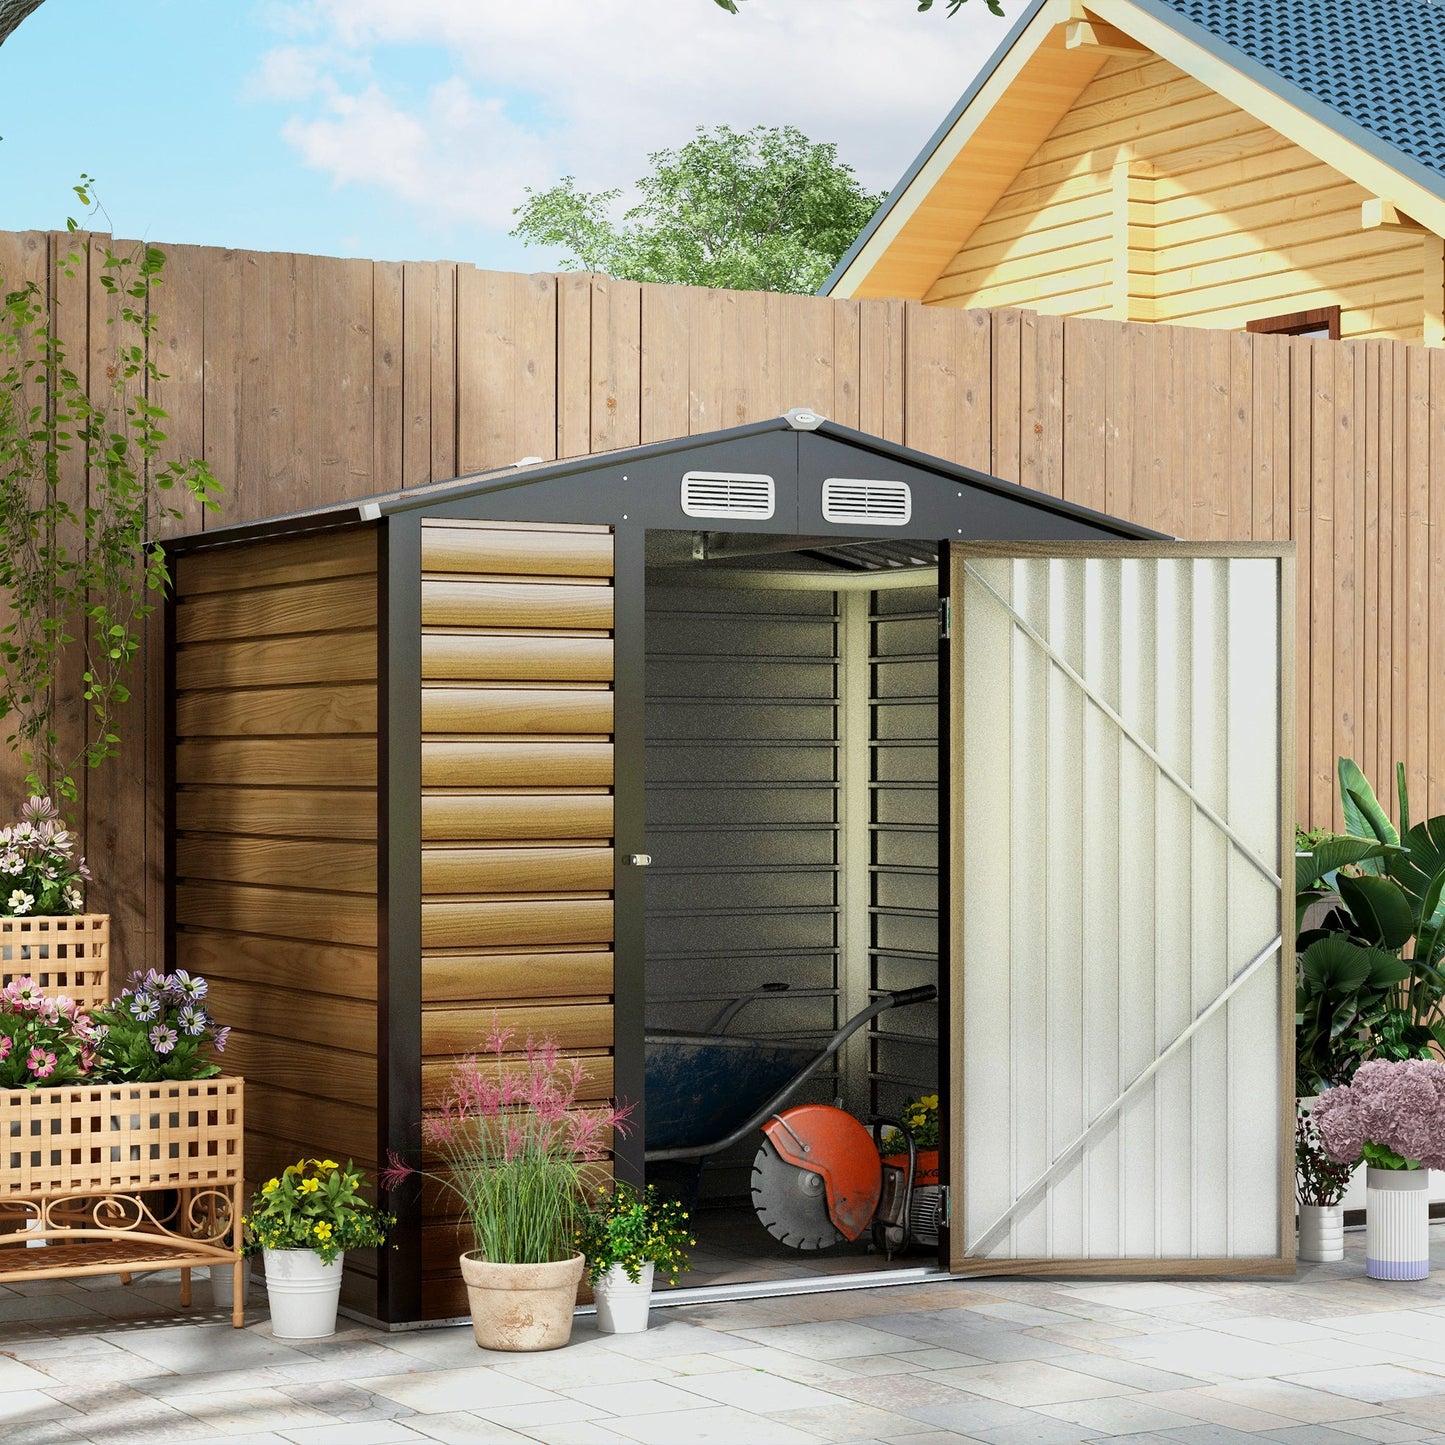 -Outsunny 6 x 4ft Metal Outdoor Storage Shed, Garden Shed House with Vents, for Yard, Patio, Lawn, Oak - Outdoor Style Company